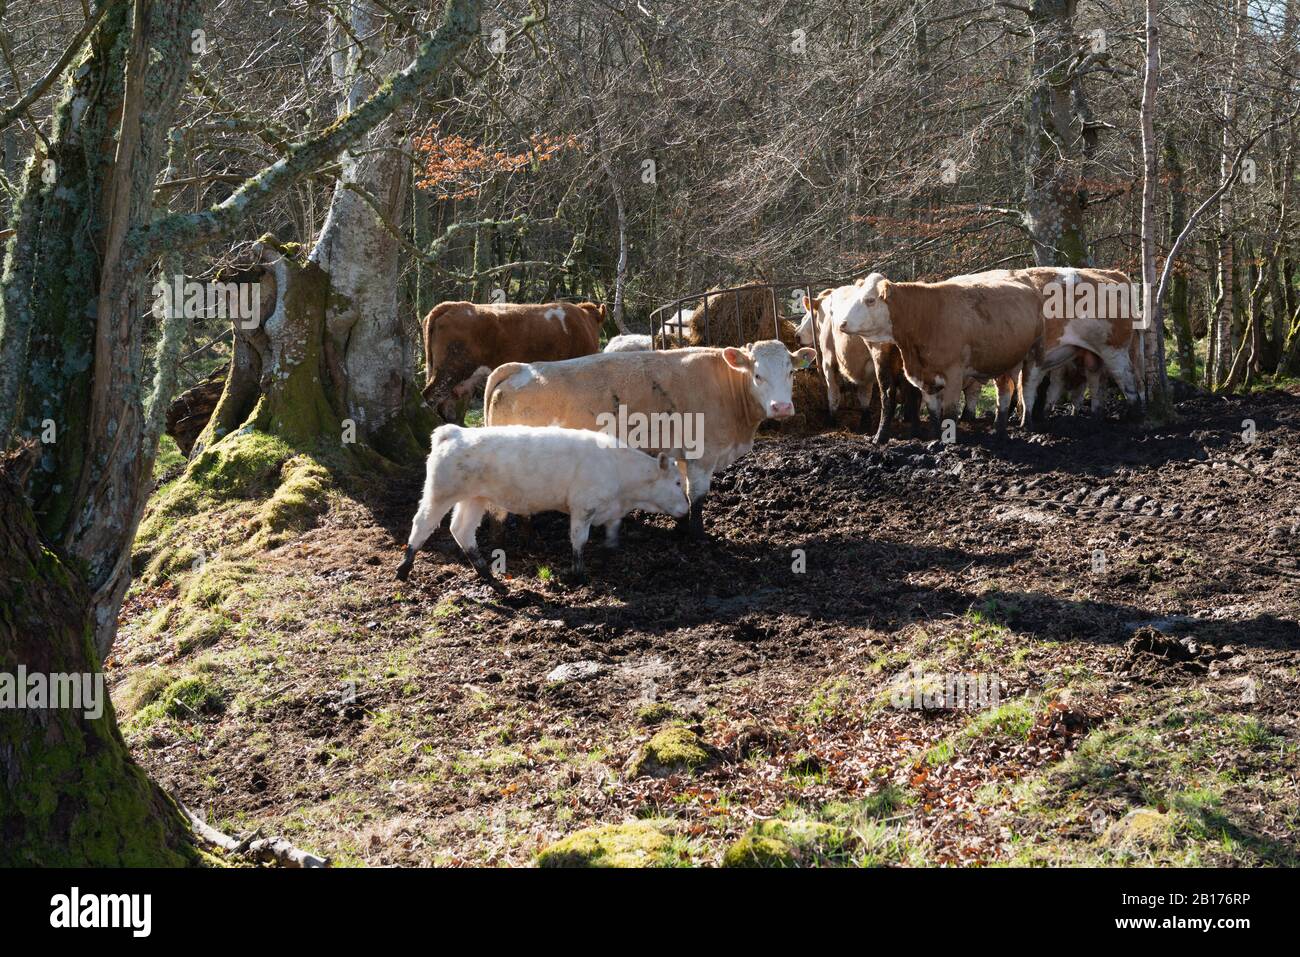 Cattle Feeding on Hay in a Muddy Woodland Clearing in Spring Sunshine Stock Photo